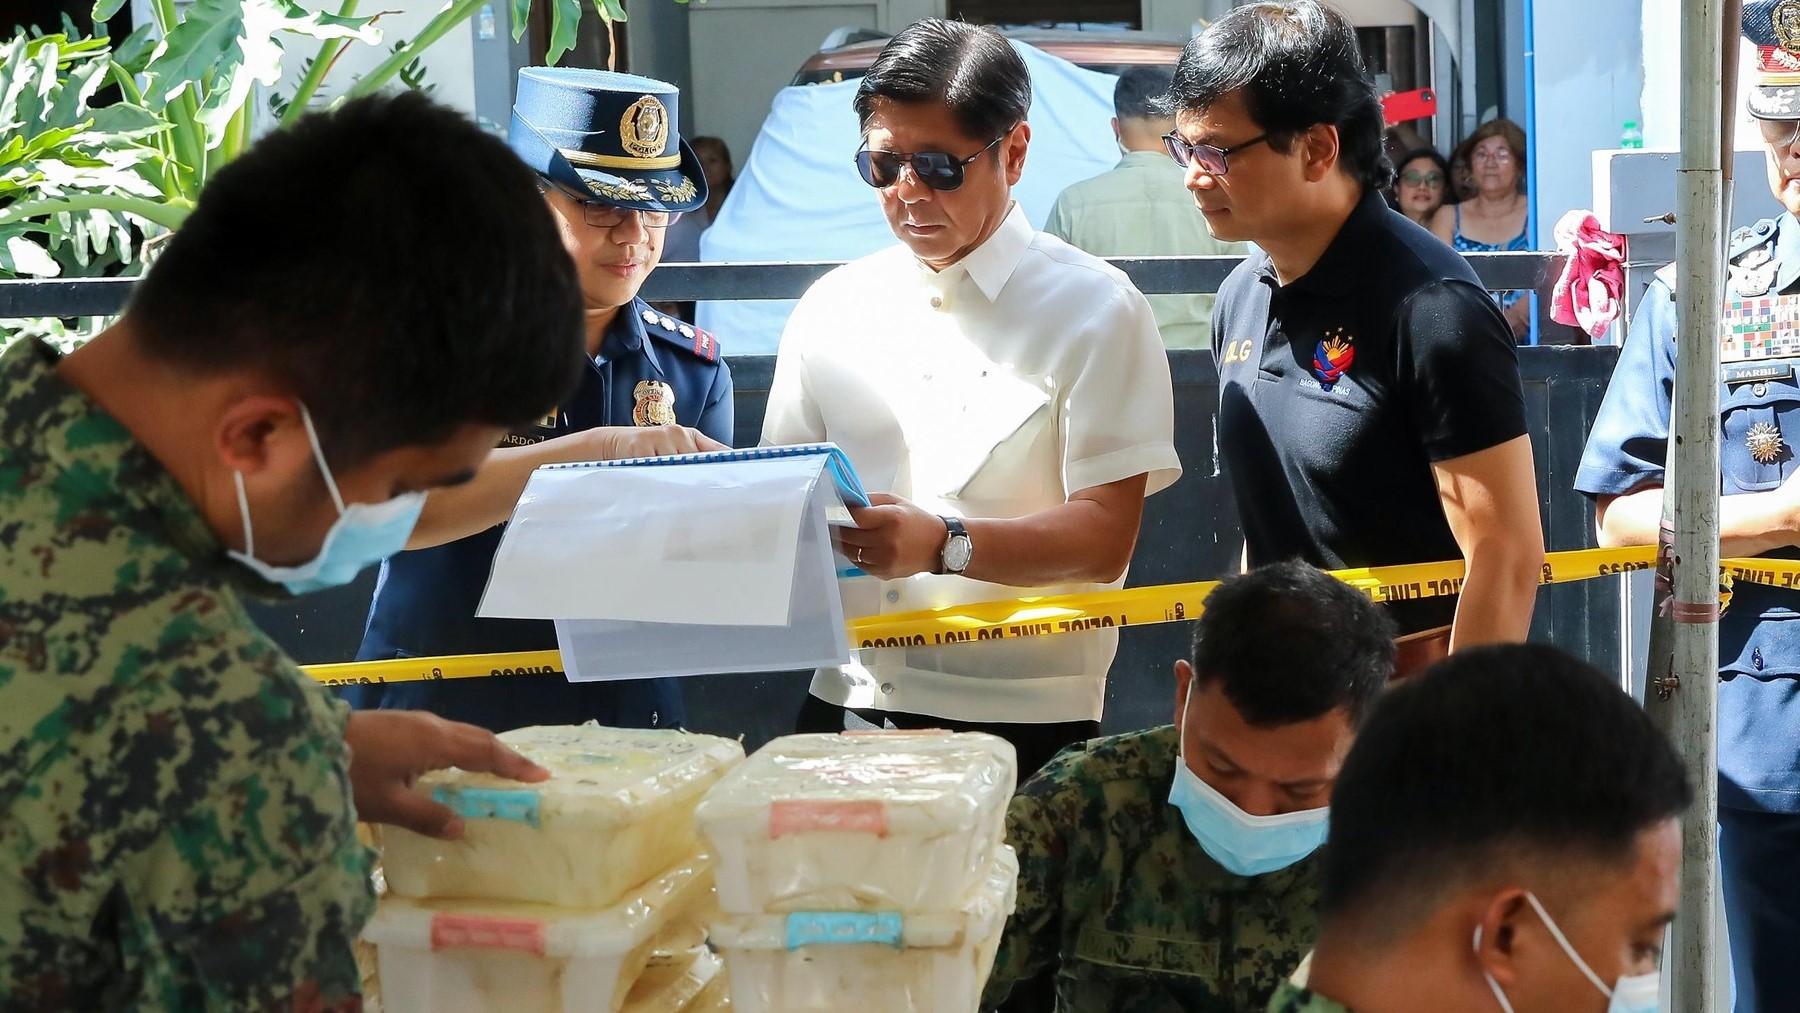 PNP: Biggest drug haul came from ‘different source’